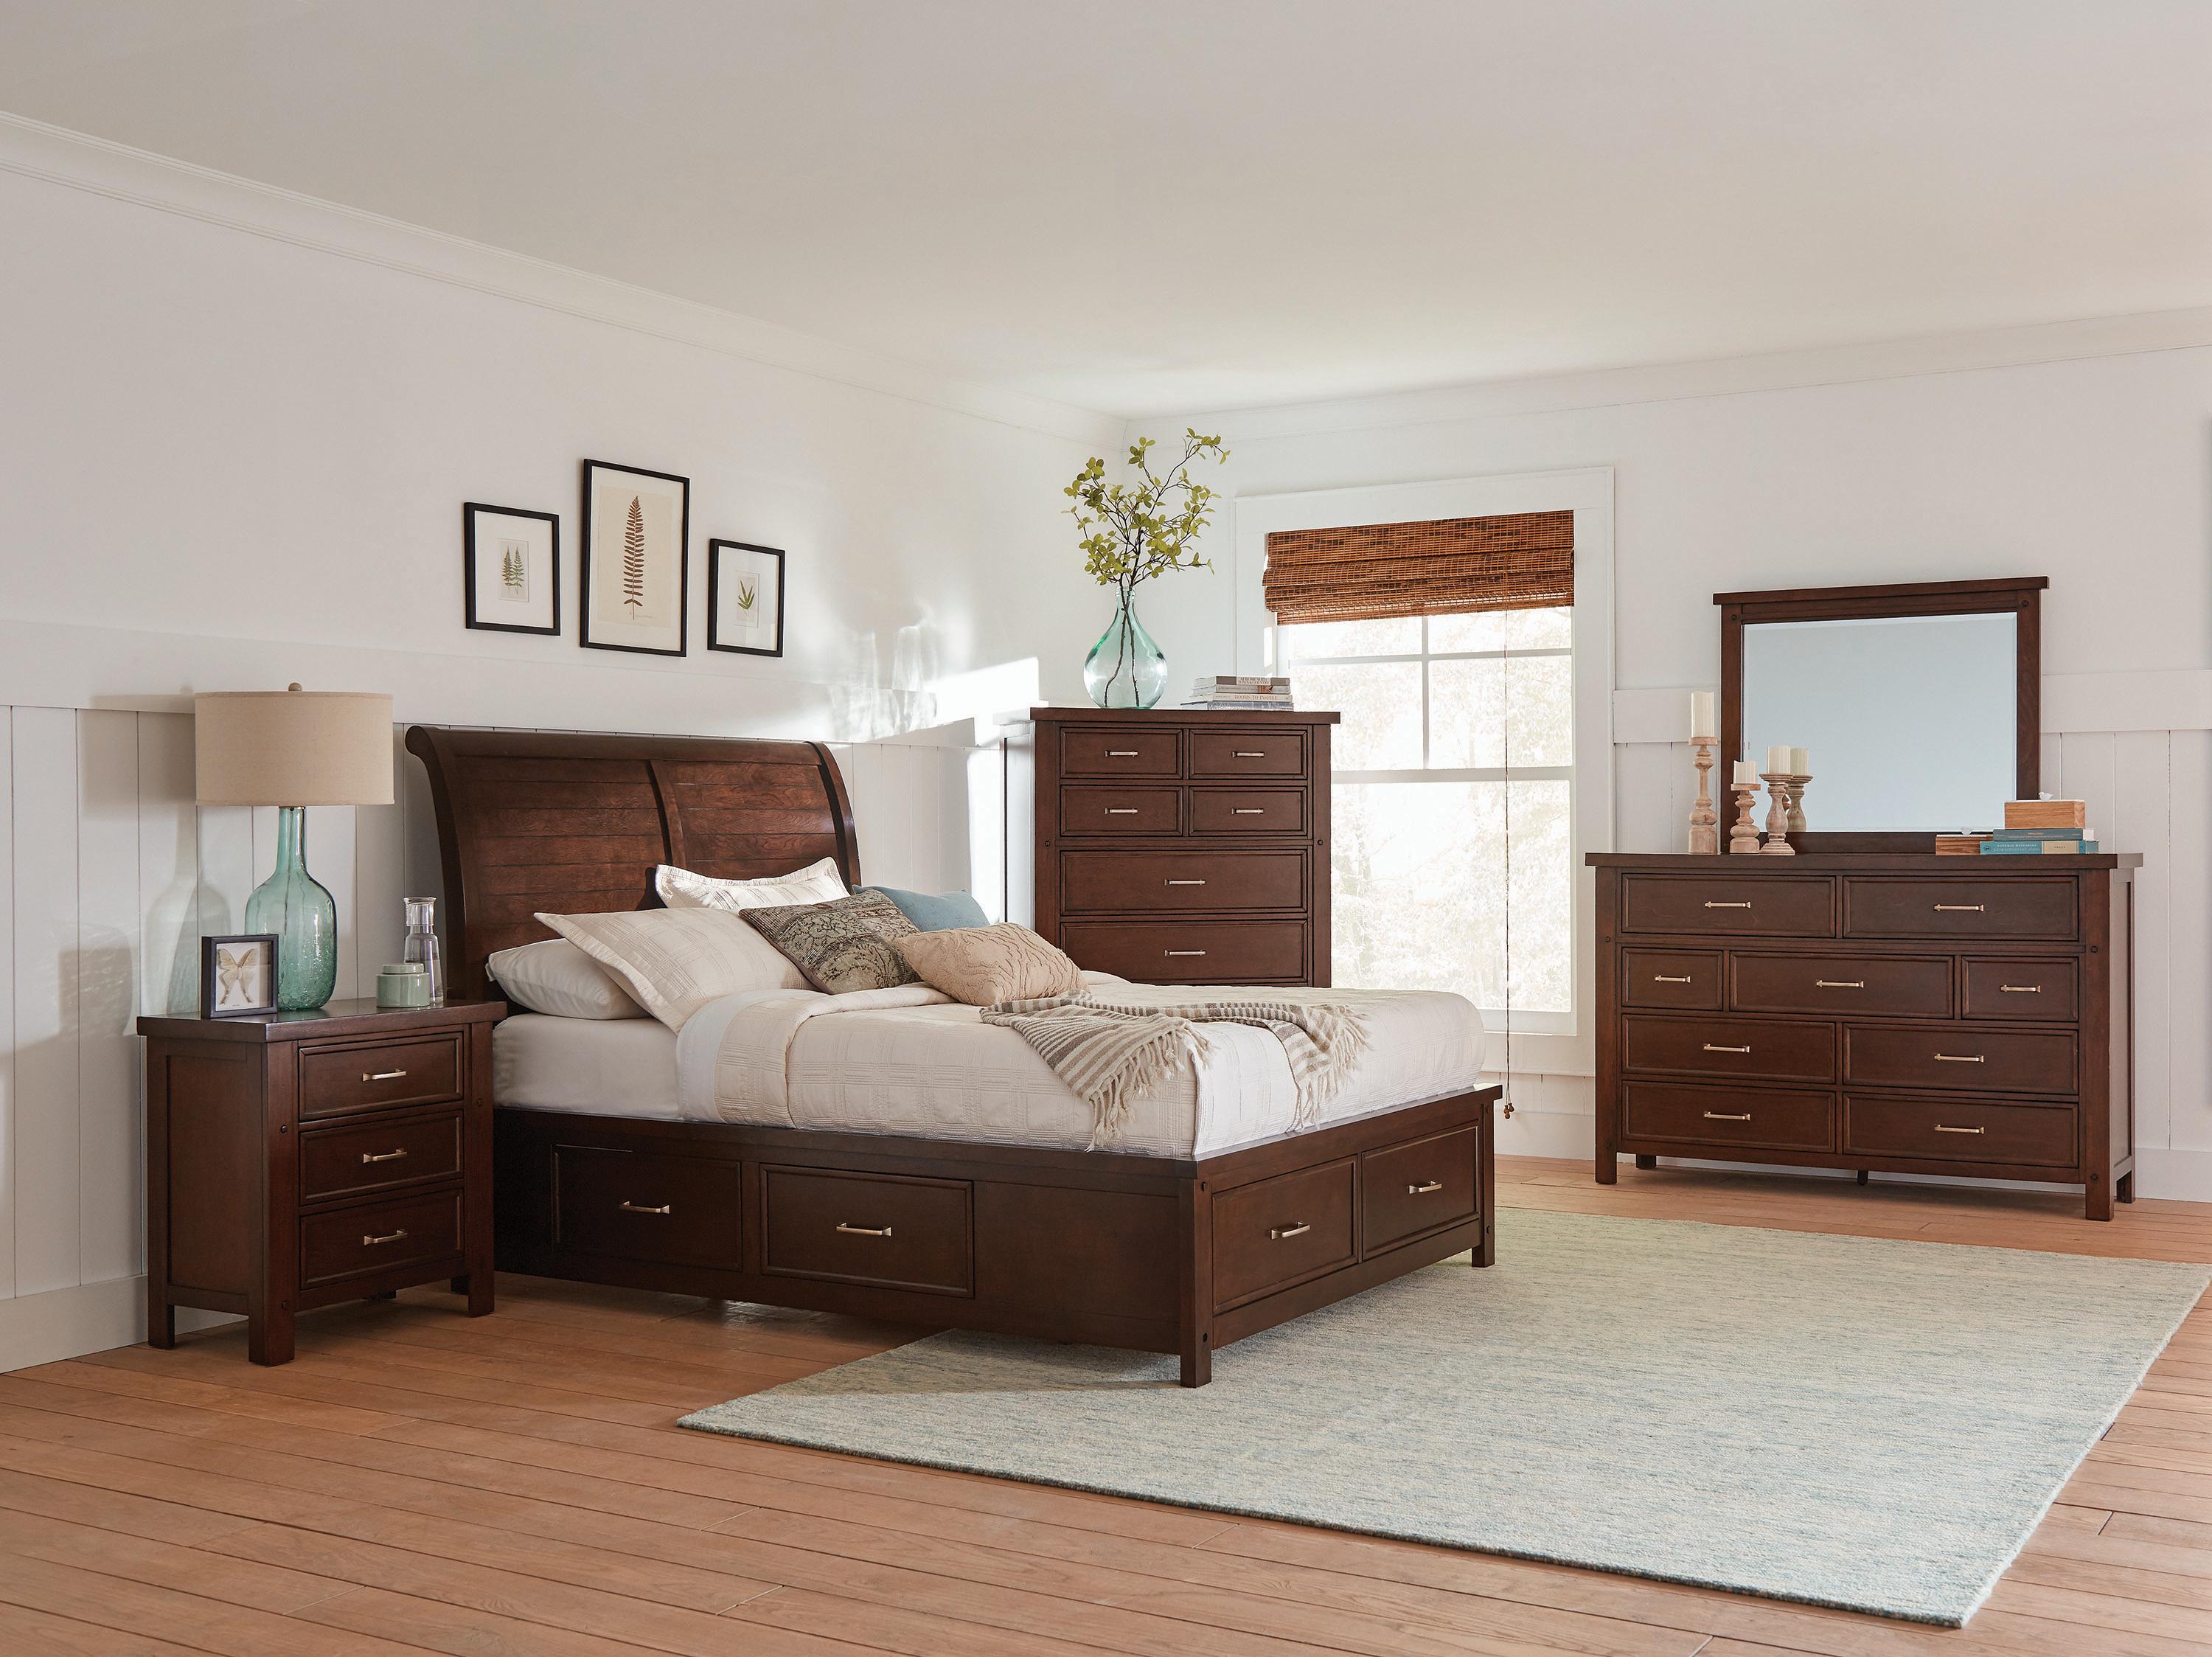 

    
Transitional Pinot Noir Solid Wood Queen Bedroom Set 3pcs Coaster 206430Q Barstow
